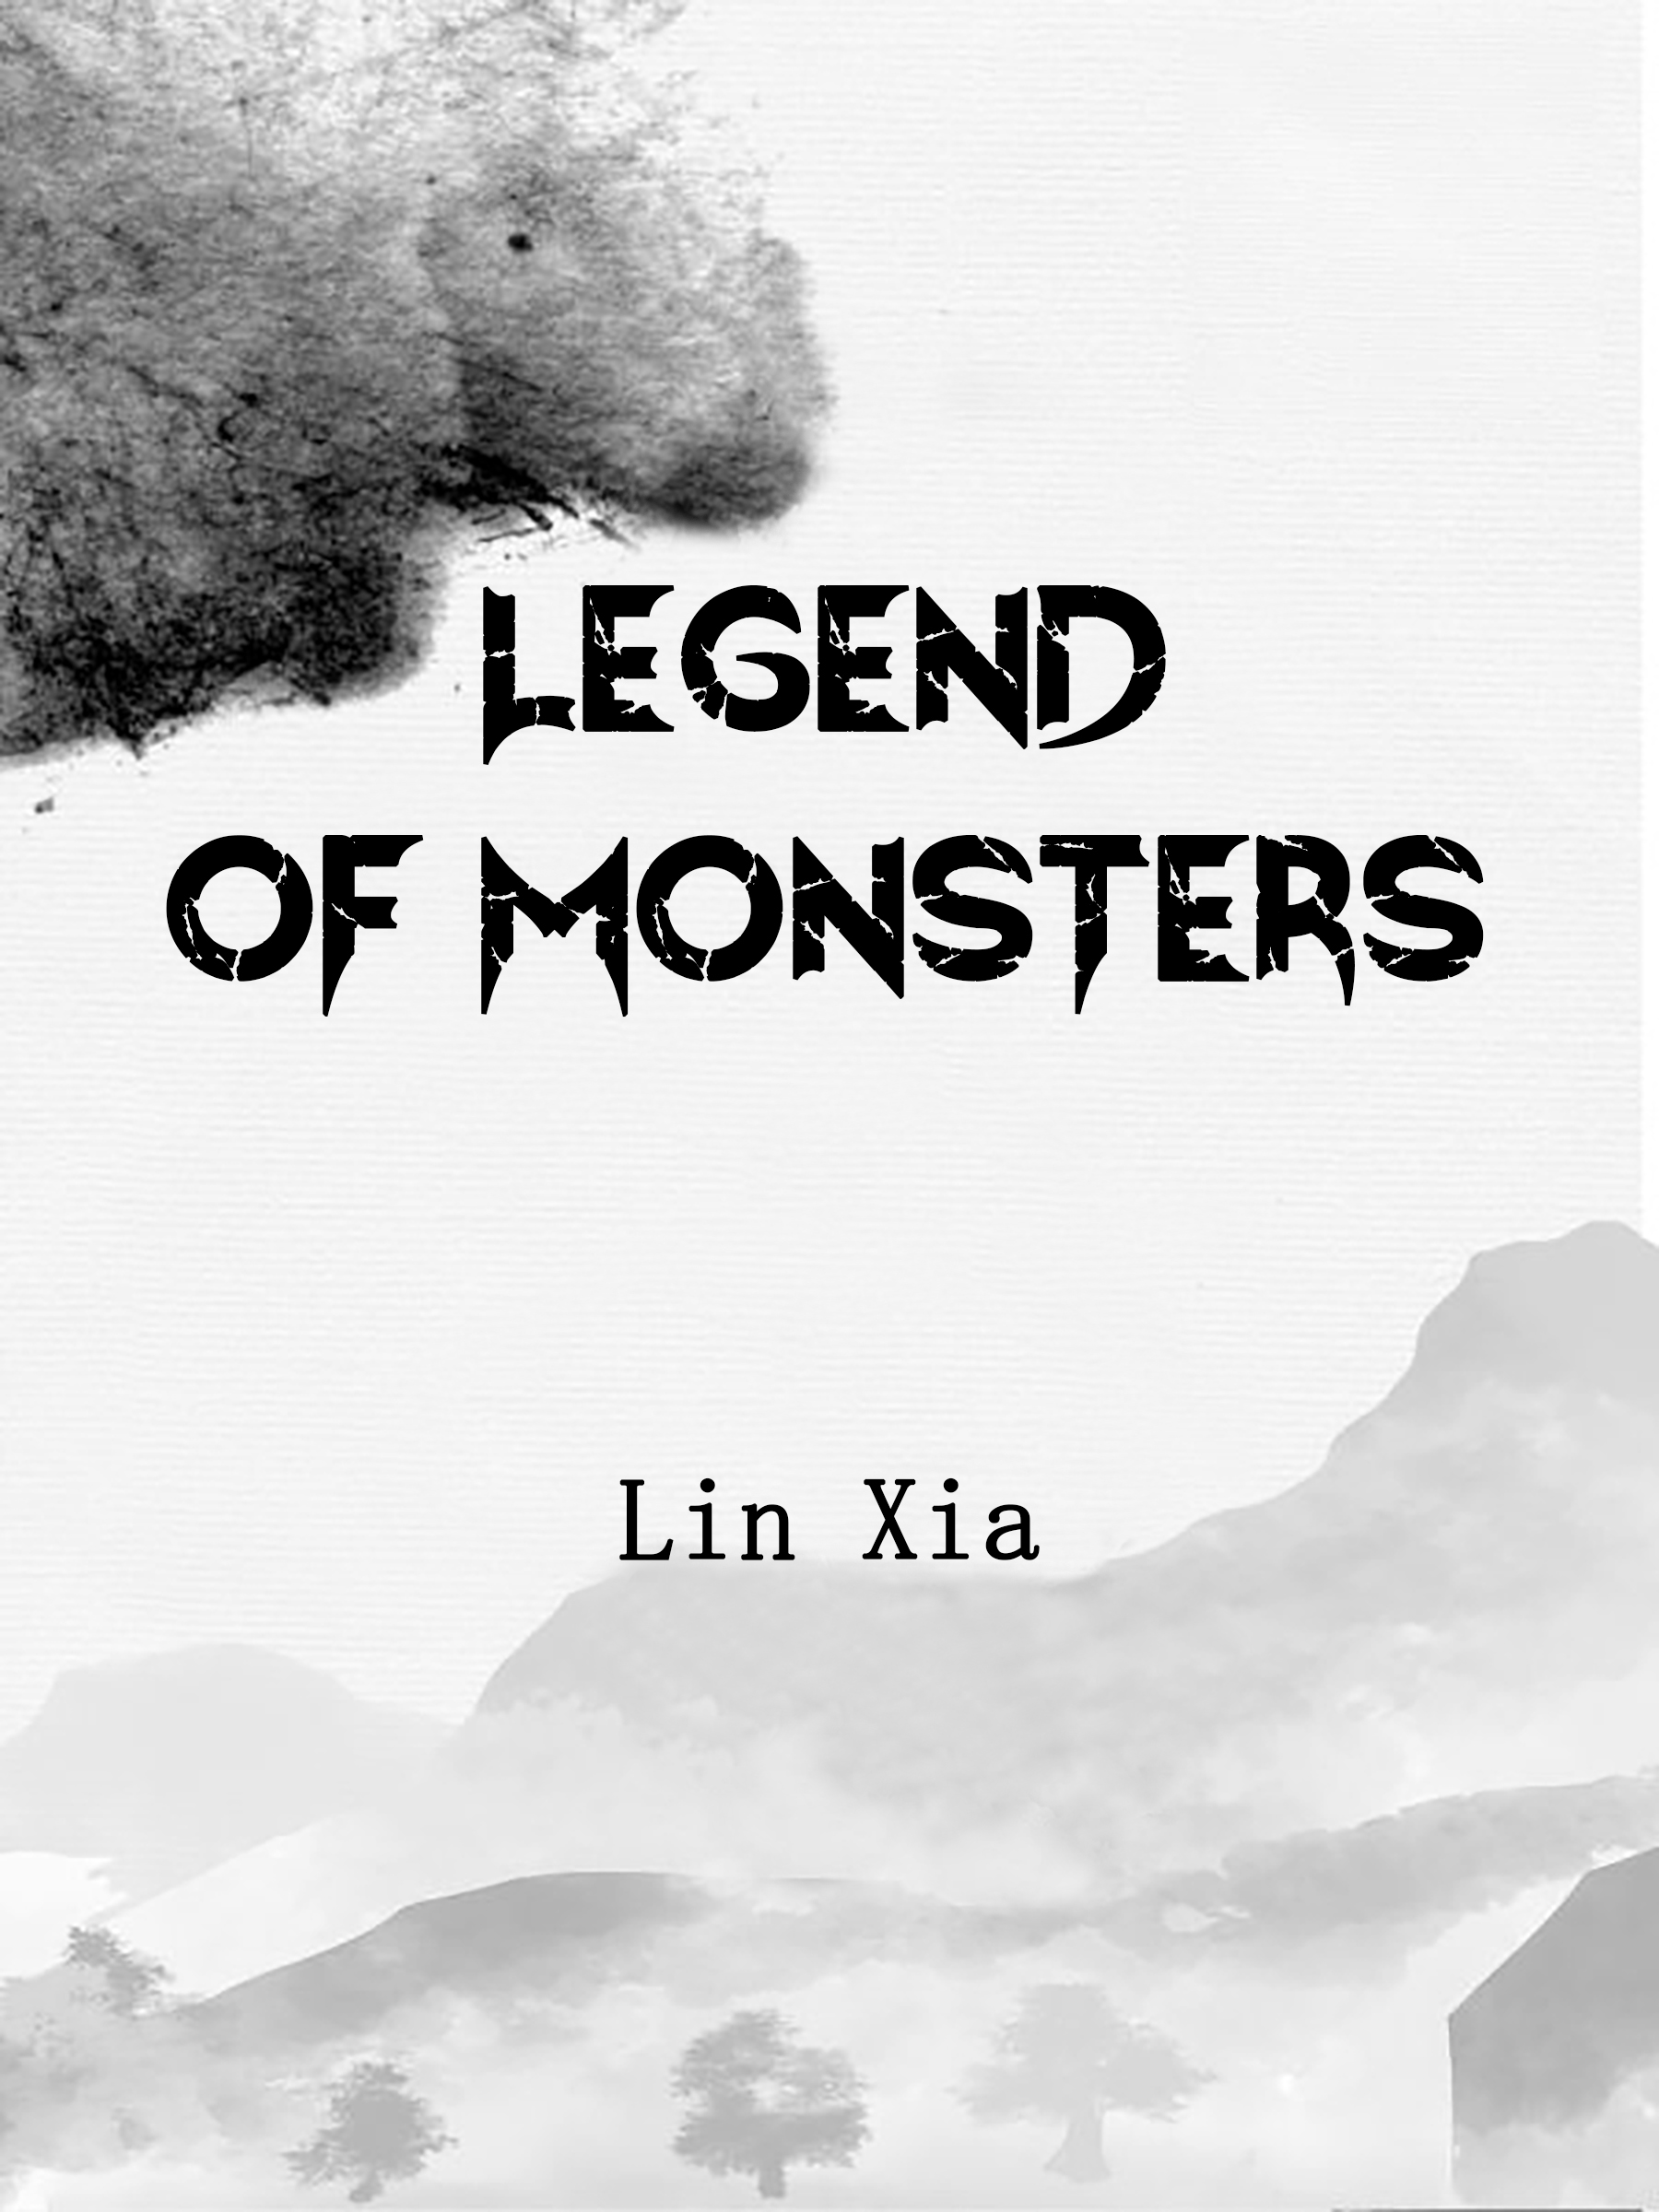 big legend sequel the monster chronicles